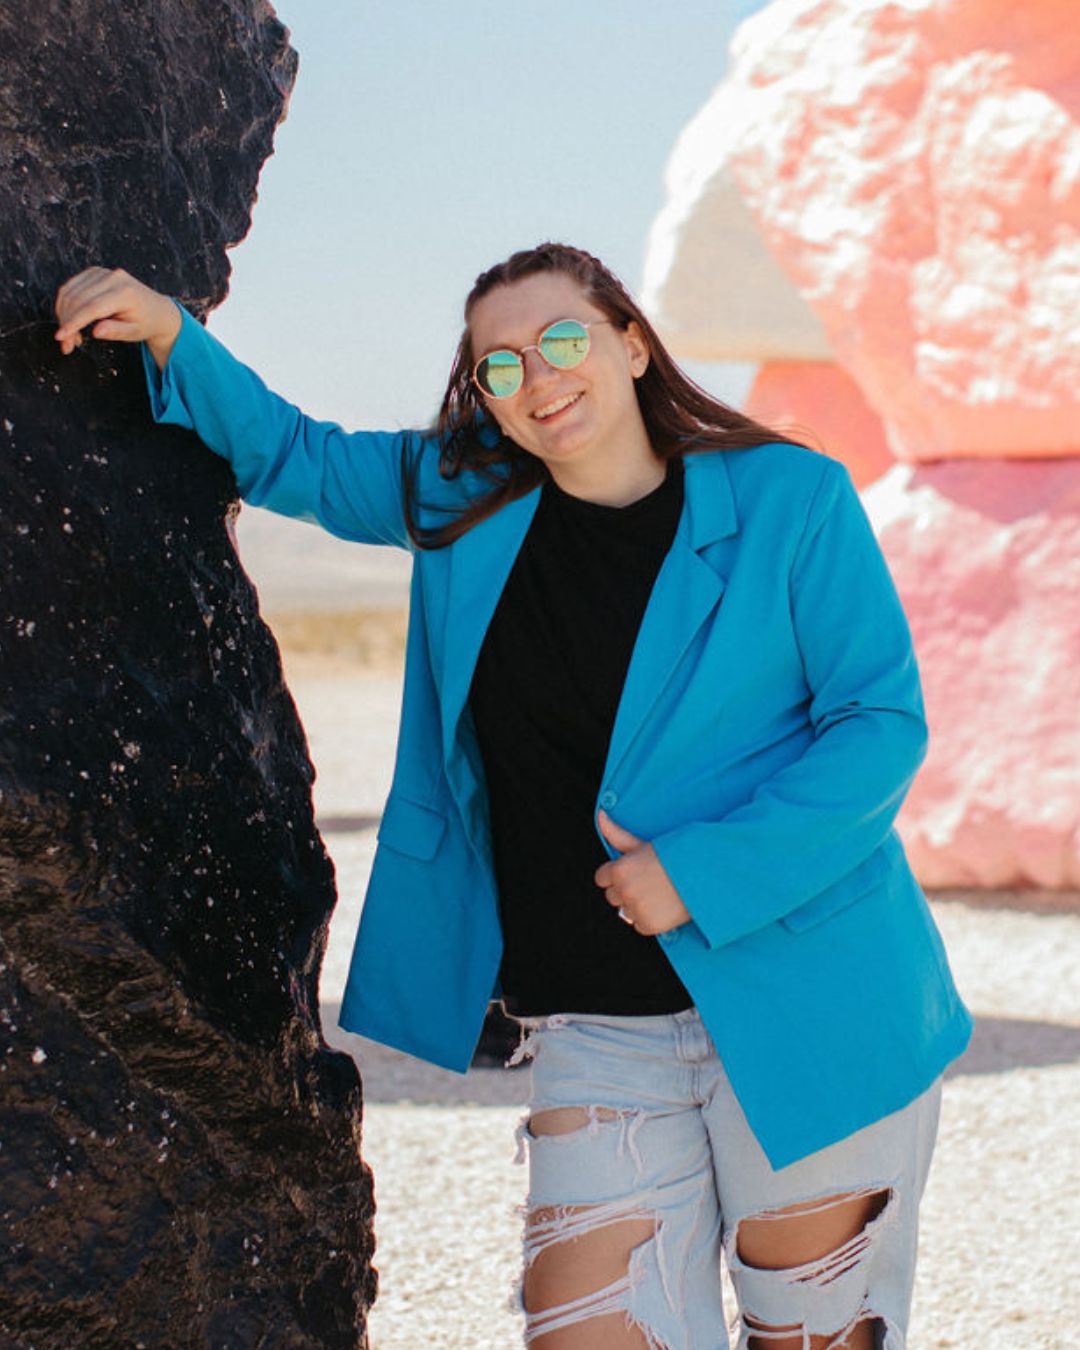 Woman in a blue blazer smiling by colorful rocks.